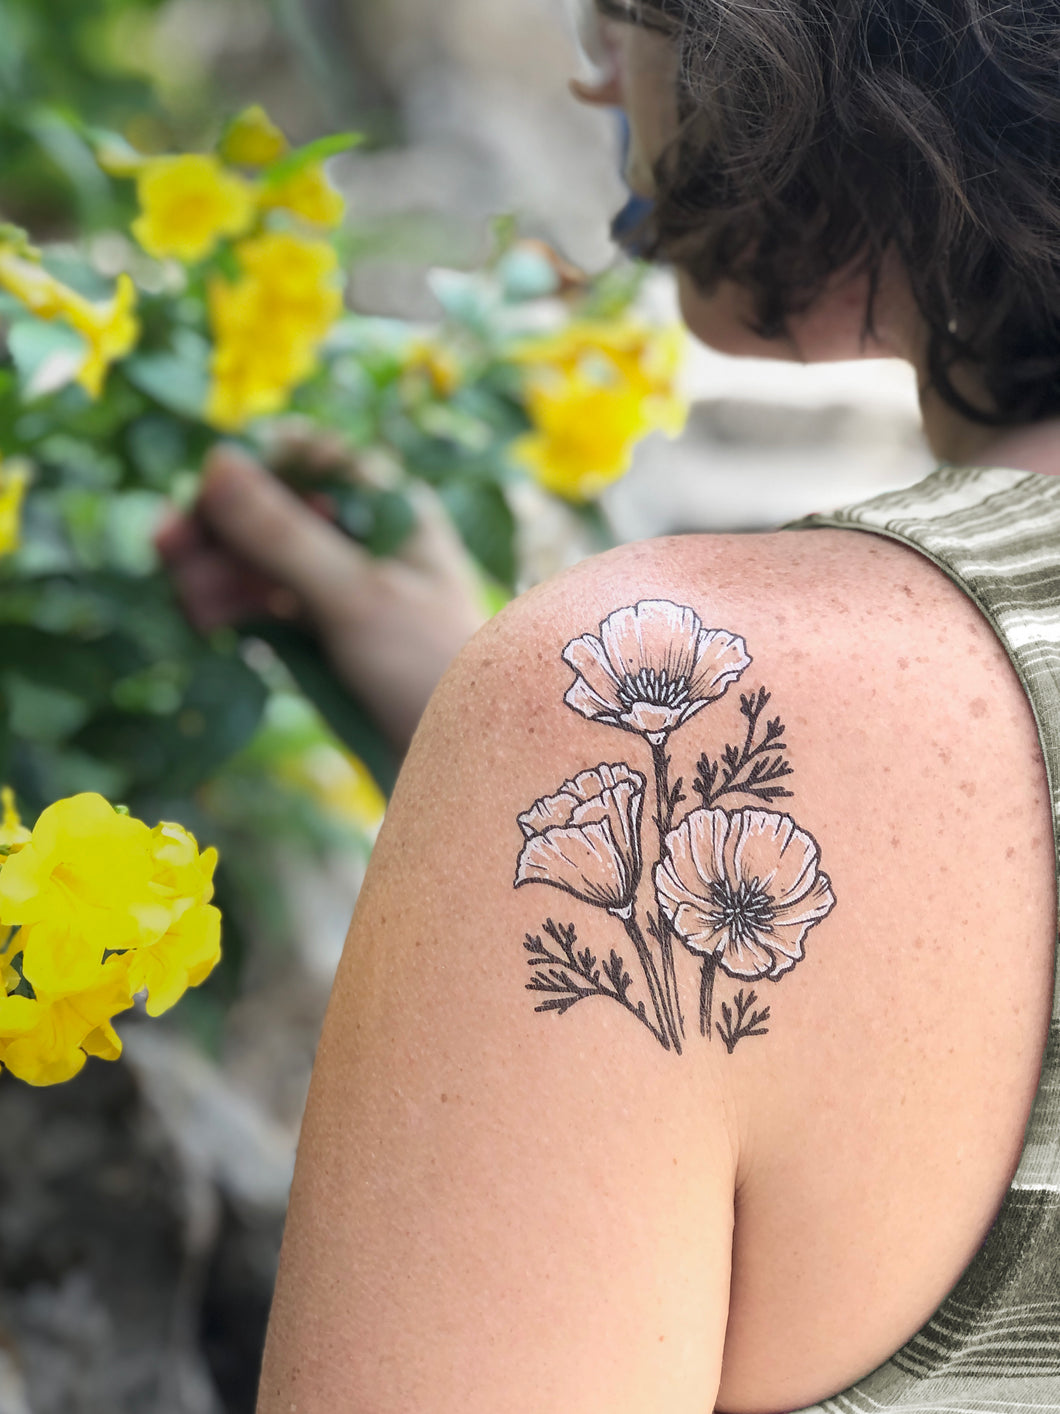 Tattoo uploaded by Tattoodo  Birth month flower tattoo by Erica Bae  EricaBae daisy birthmonthflowertattoos birthmonthflowers flowertattoo  flowers florals petals blooms leaves nature plant birthmonth   Tattoodo